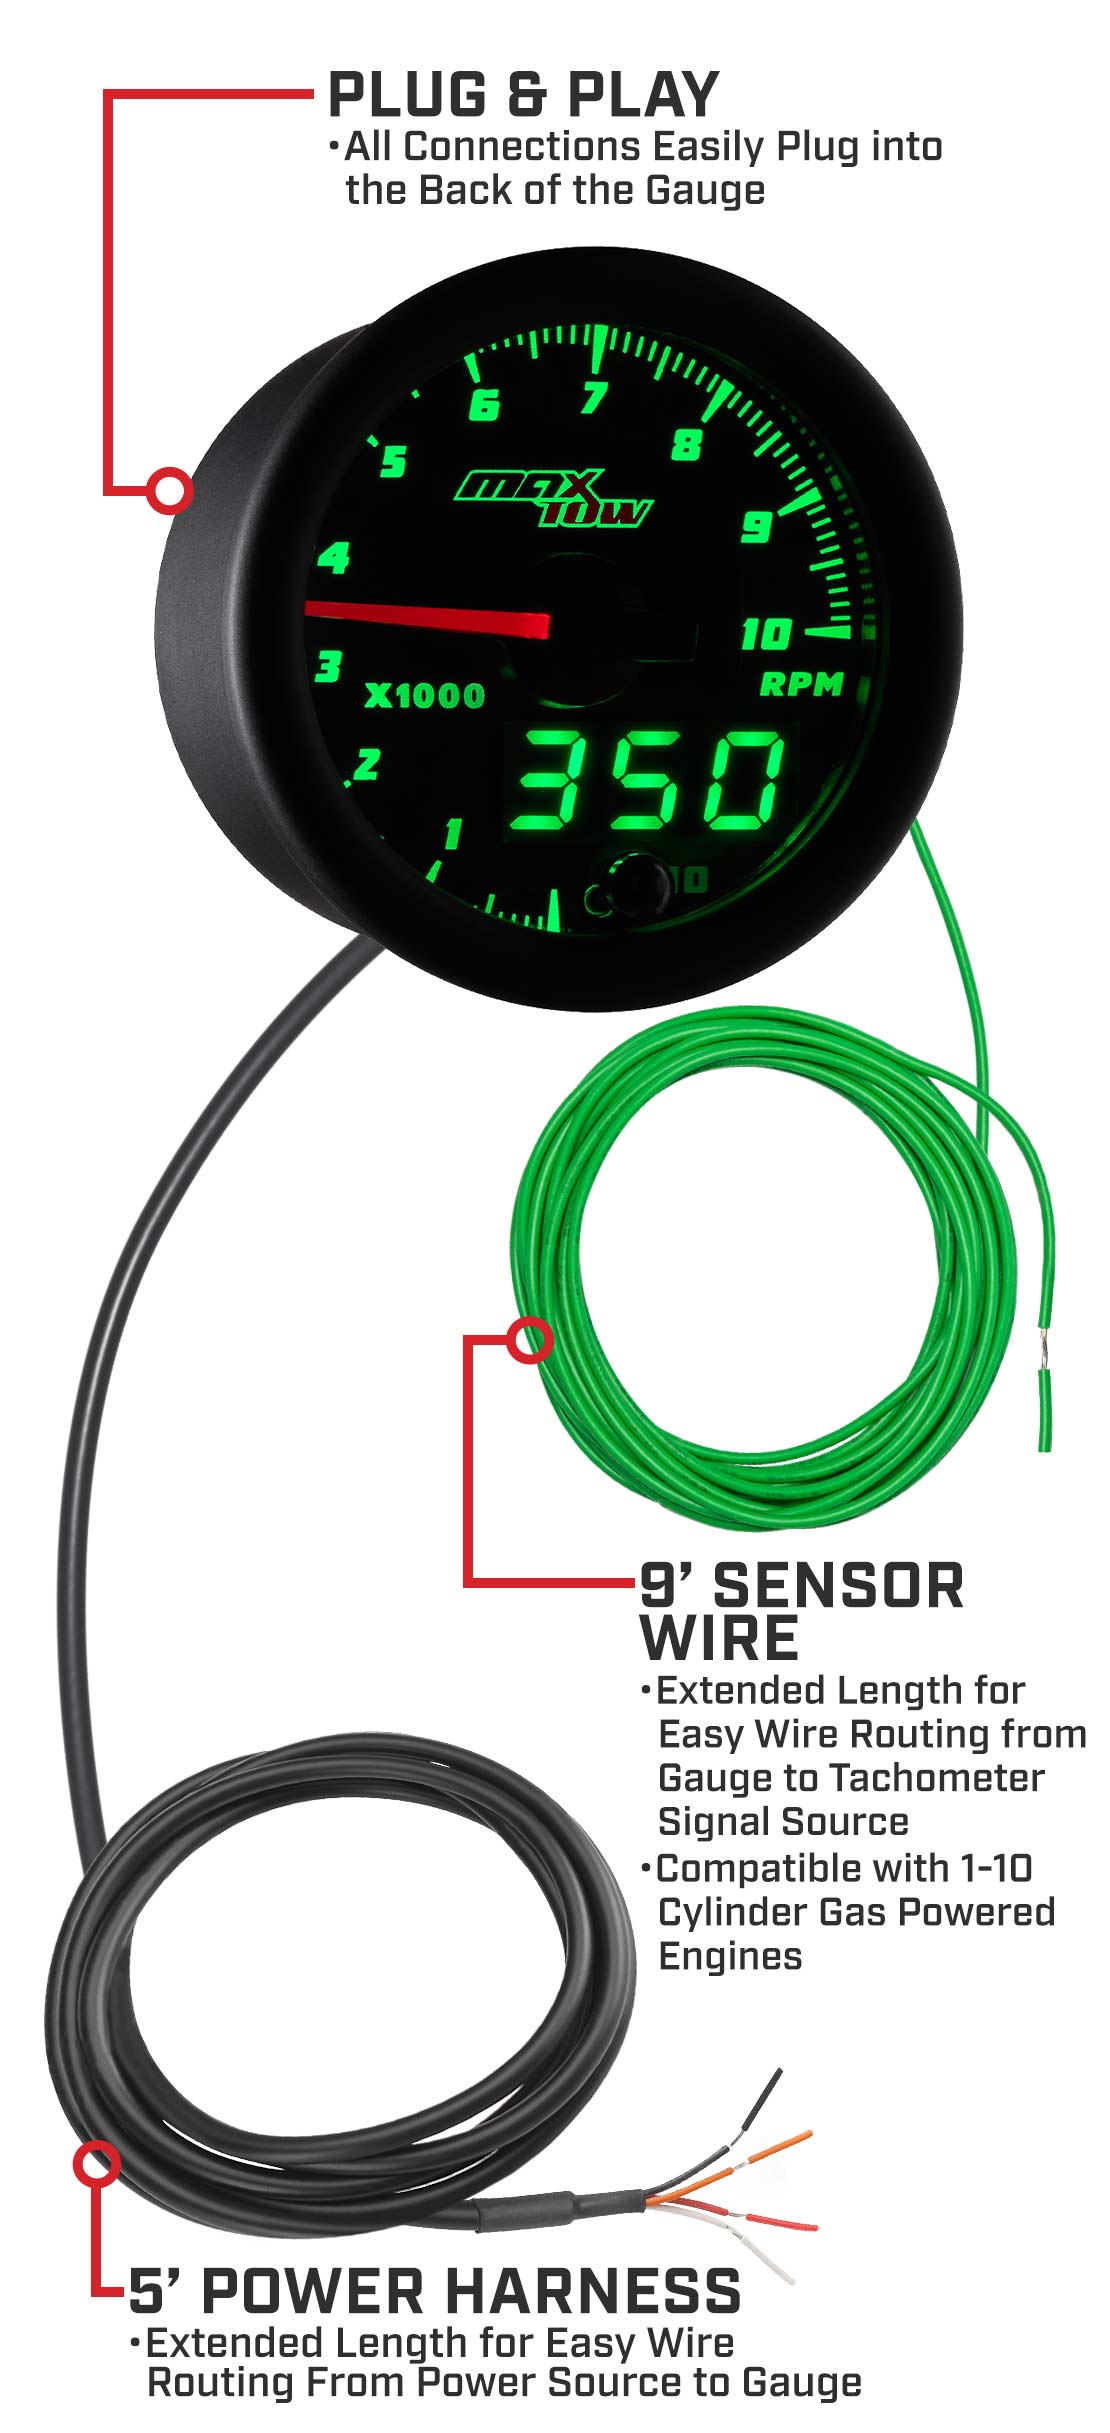 Black & Green Double Vision 2 Inch Tachometer Gauge Parts & Wiring